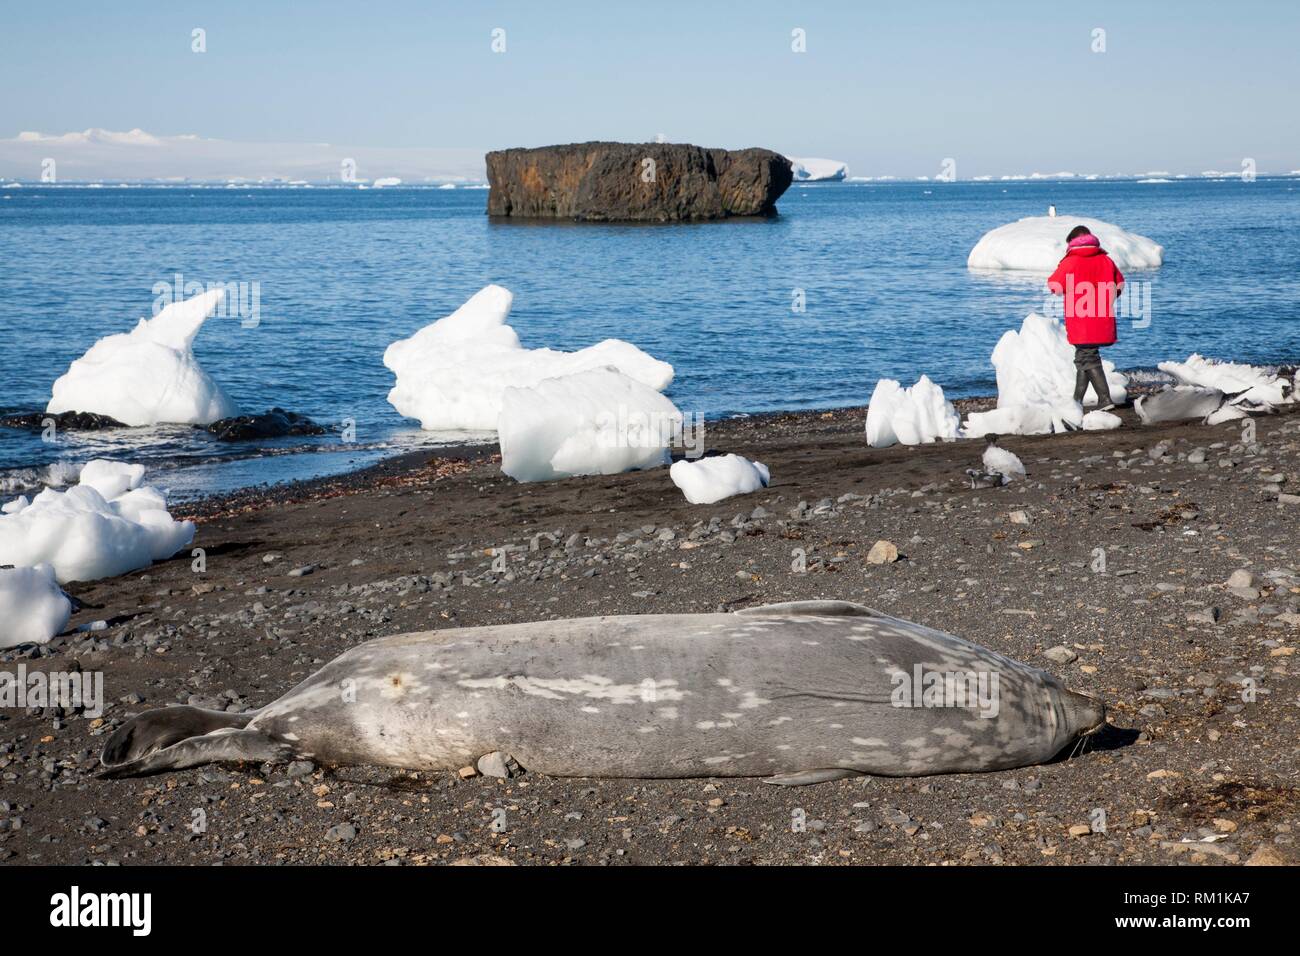 Antarctica. A Japanese tourist near Weddell seal (Leptonychotes weddelli) on the rocky beach of Brown Bluff. East coast of Tabarin Peninsula, on the Stock Photo